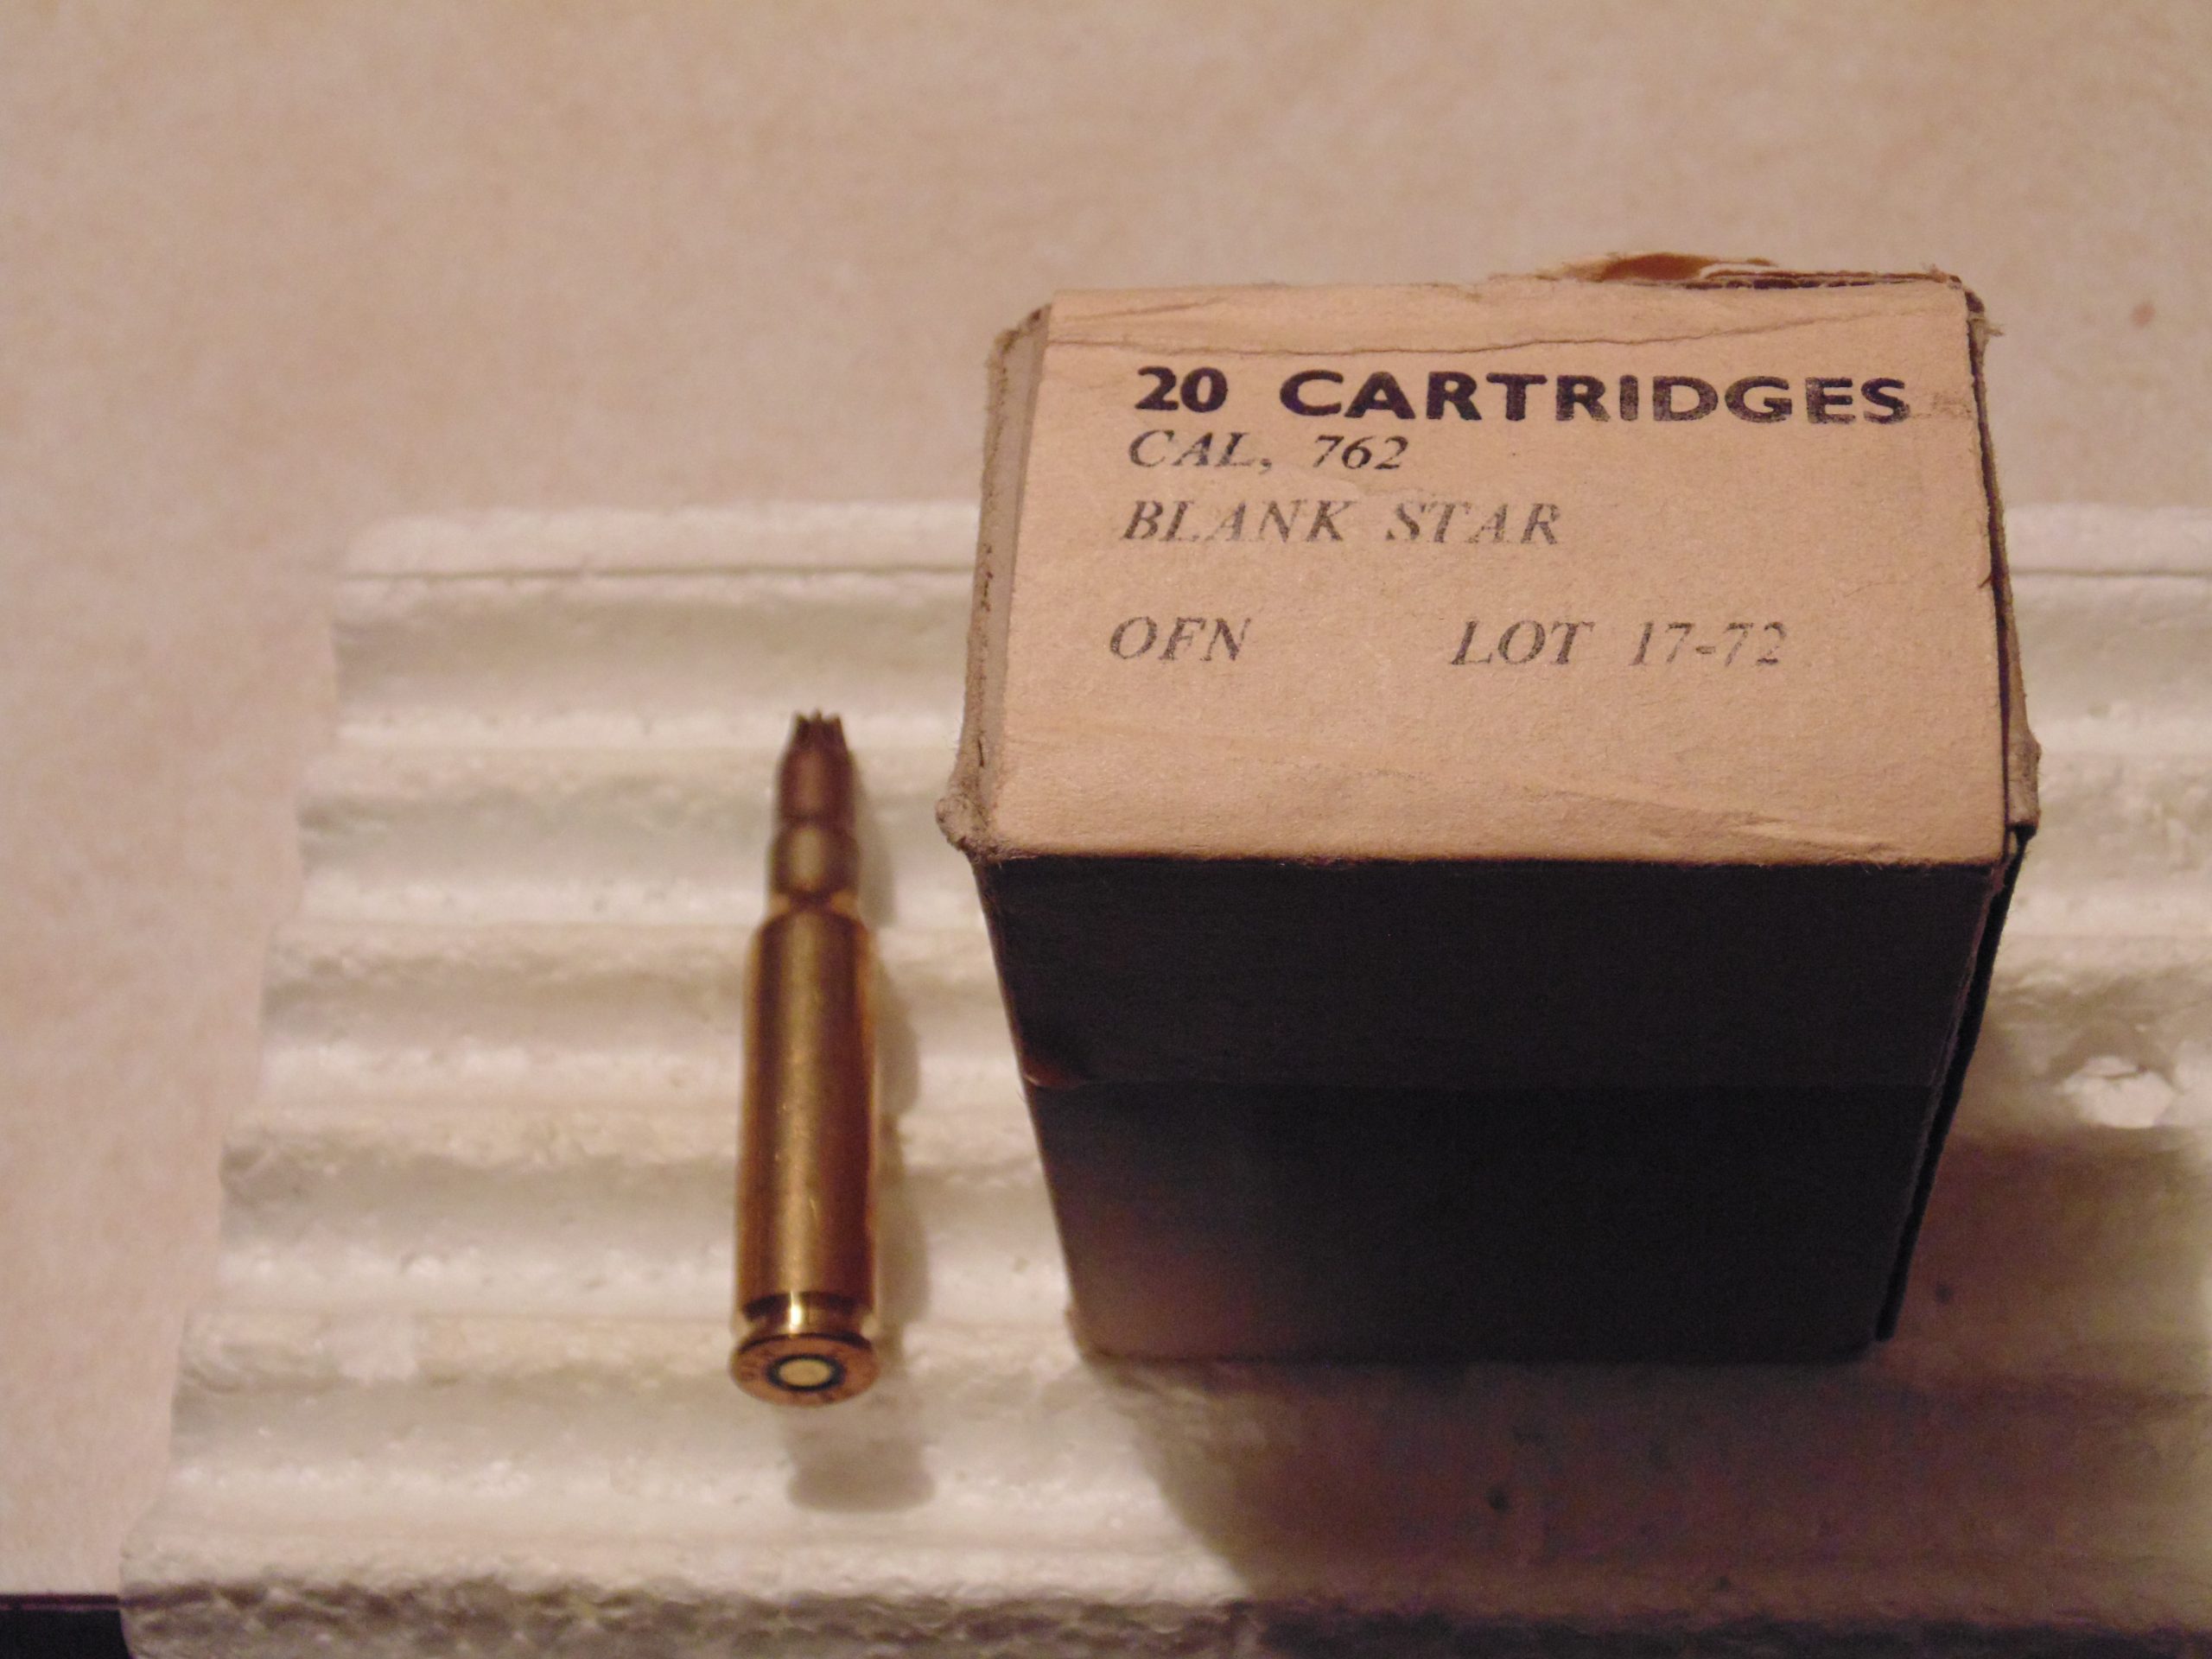 7.62X51 BLANK STAR OFN 7.62 72 – CollectibleAmmunition.com – Your source  for Collectible Ammunition